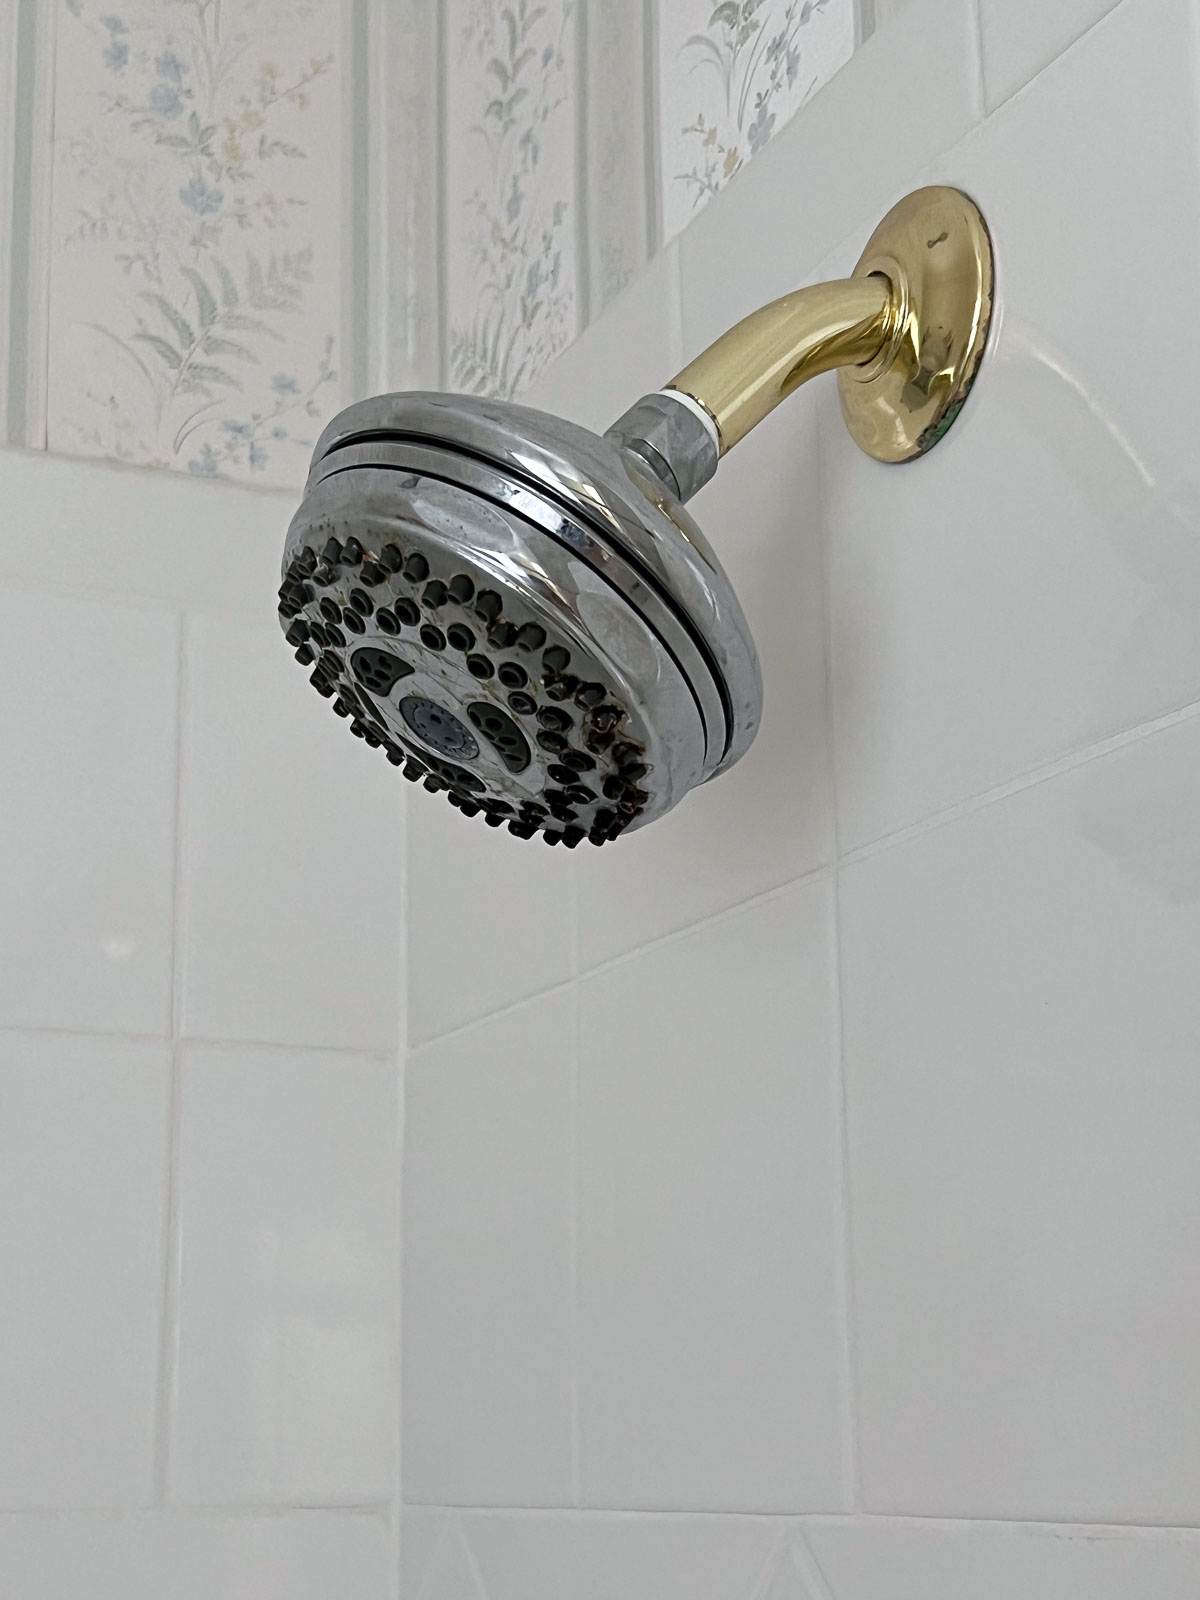 Old shower head - mix of brass and chrome